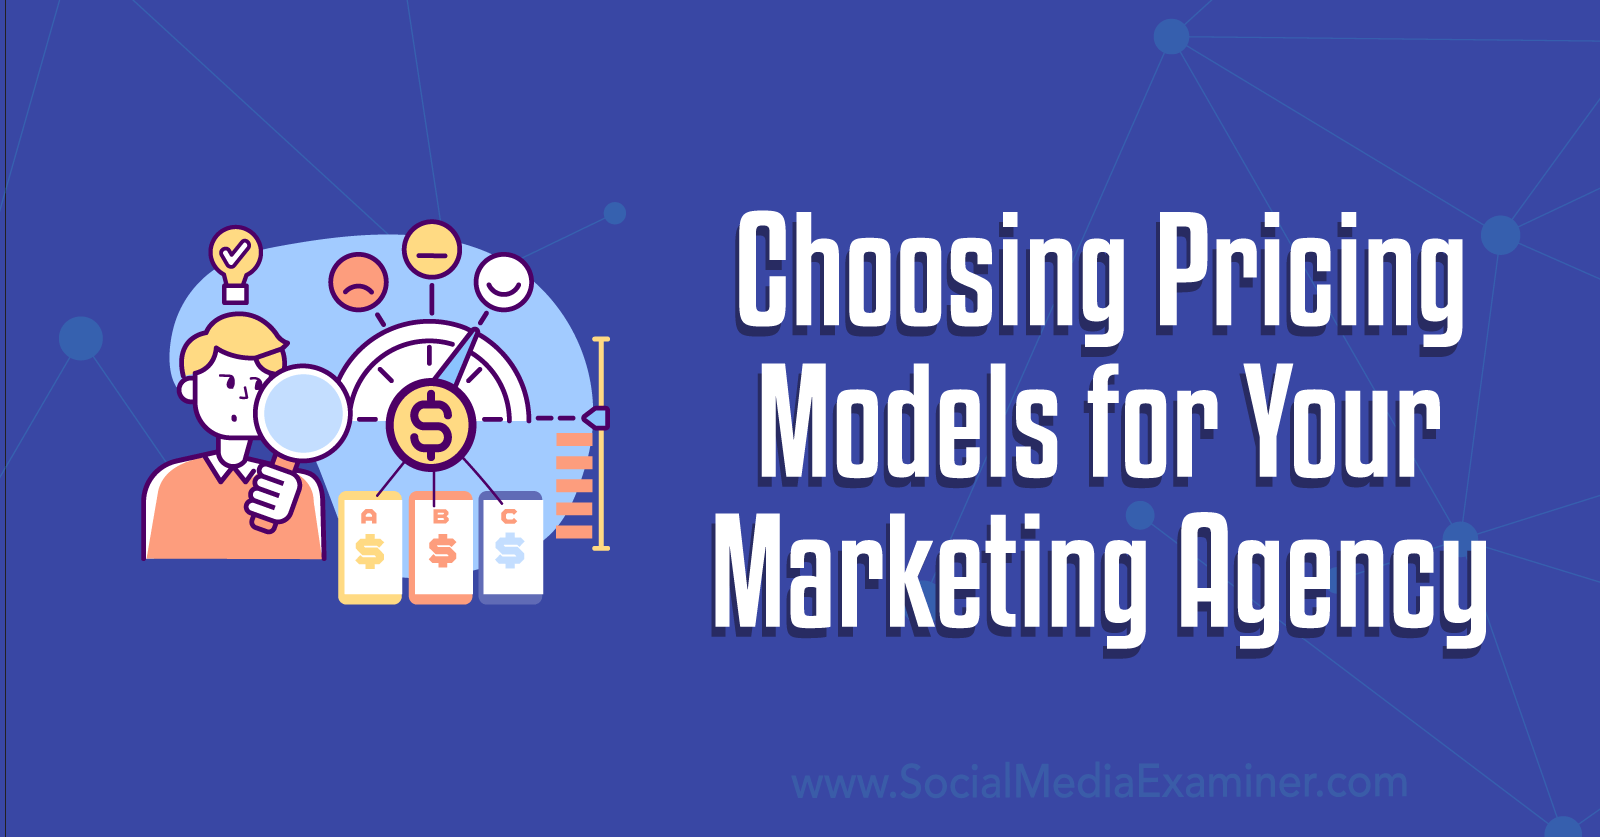 Choosing Pricing Models for Your Marketing Agency by Social Media Examiner